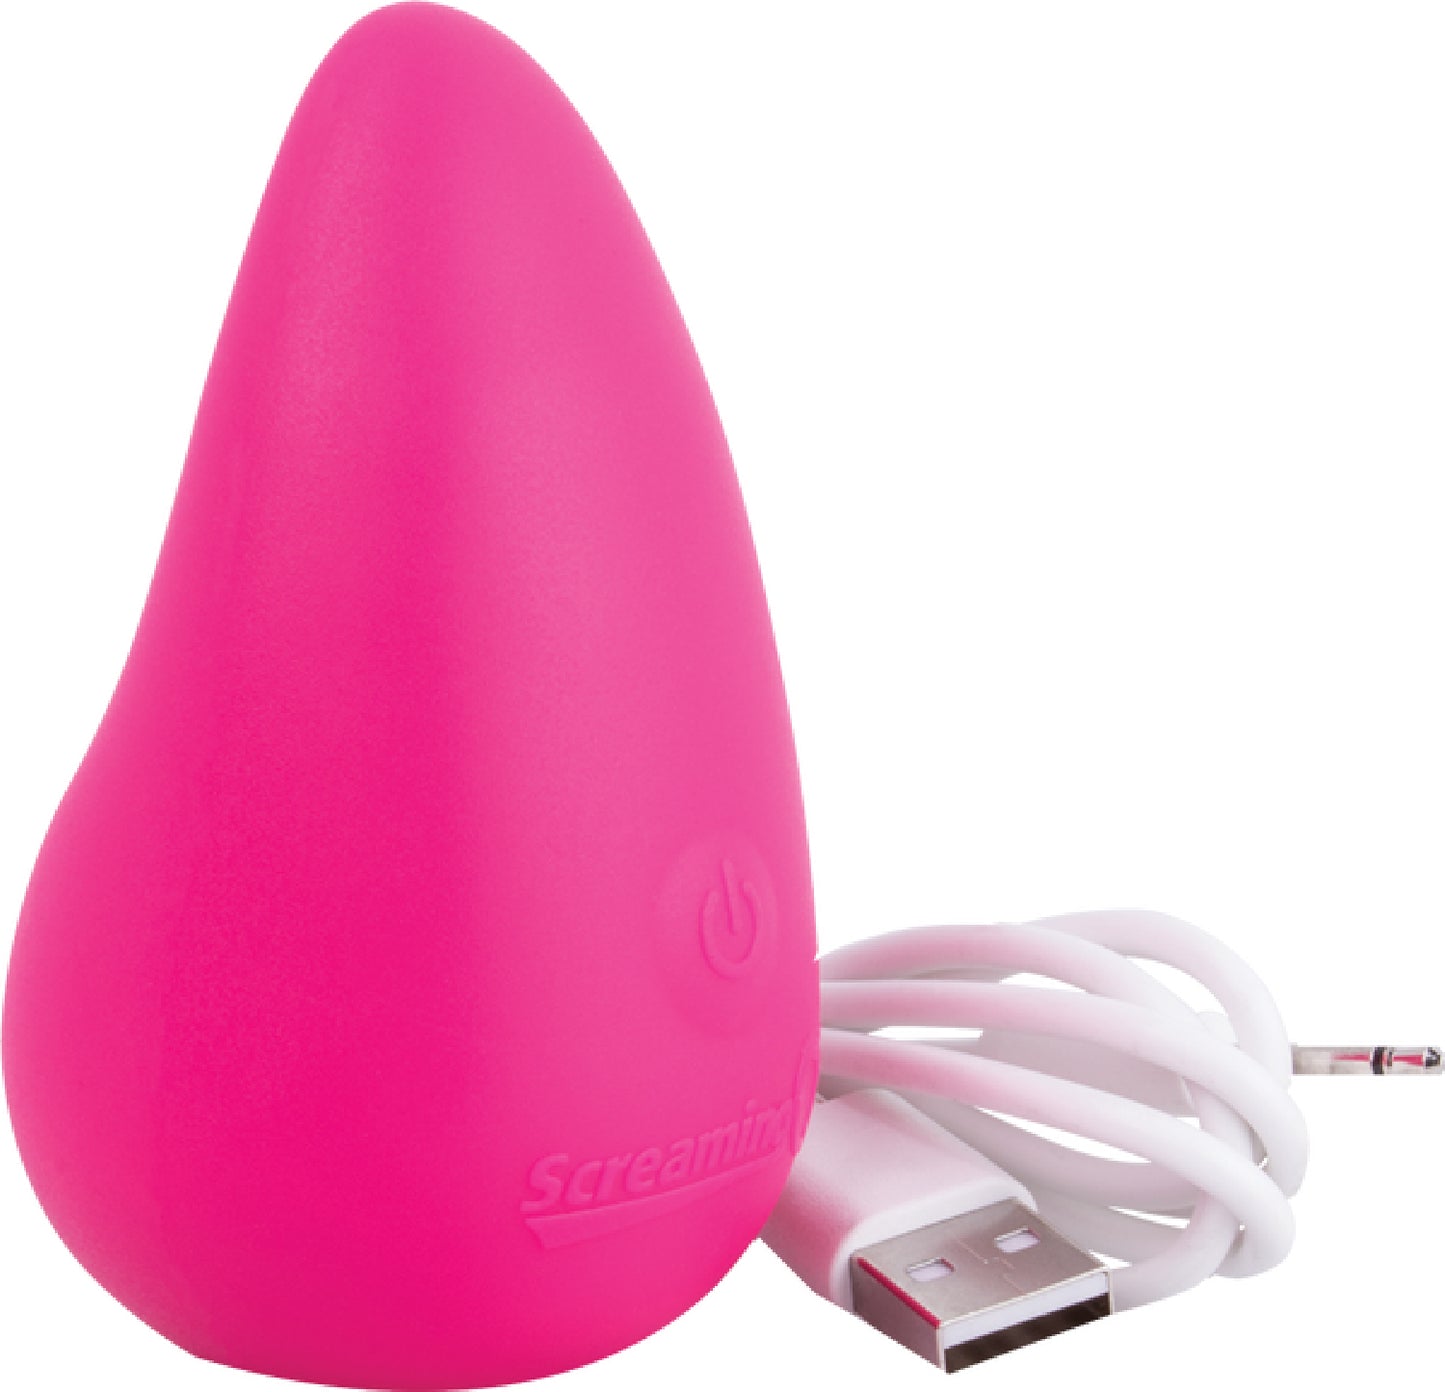 Screaming O Scoop Rechargeable Massager Vibrator  - Club X